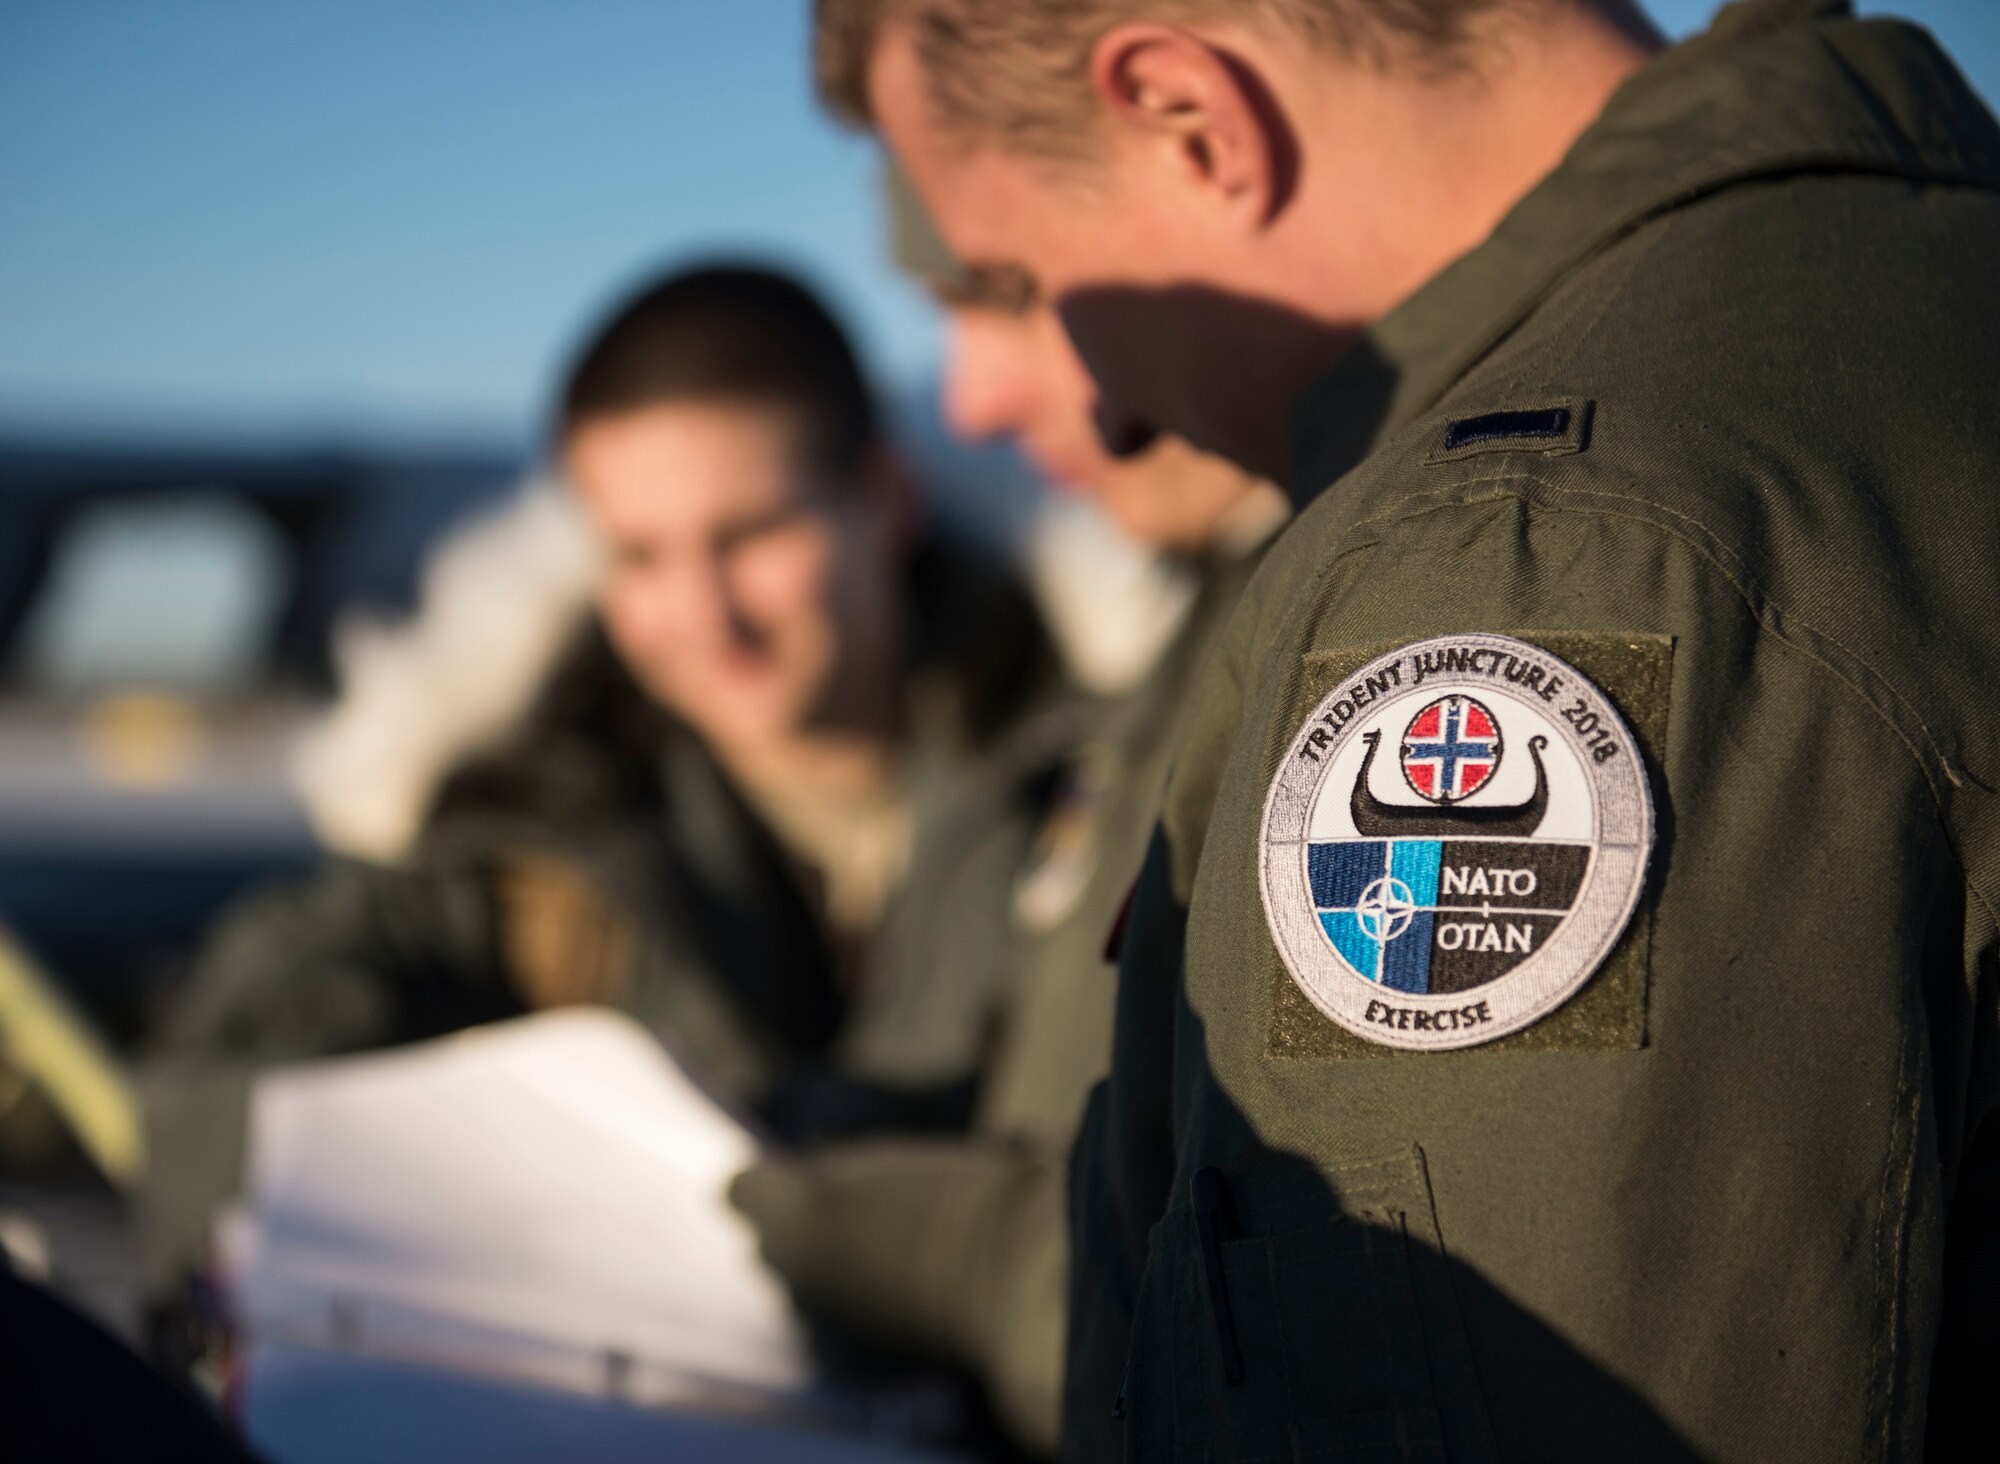 U.S. Air Force KC-135 Stratotanker aircrew conduct preflight brief before takeoff during Exercise Trident Juncture 18, from Rovaniemi, Finland, Oct. 29, 2018. Exercise Trident Juncture is the largest NATO exercise since 2002, including 31 countries and more than 50,000 military members. (U.S. Air Force photo by Senior Airman Luke Milano)